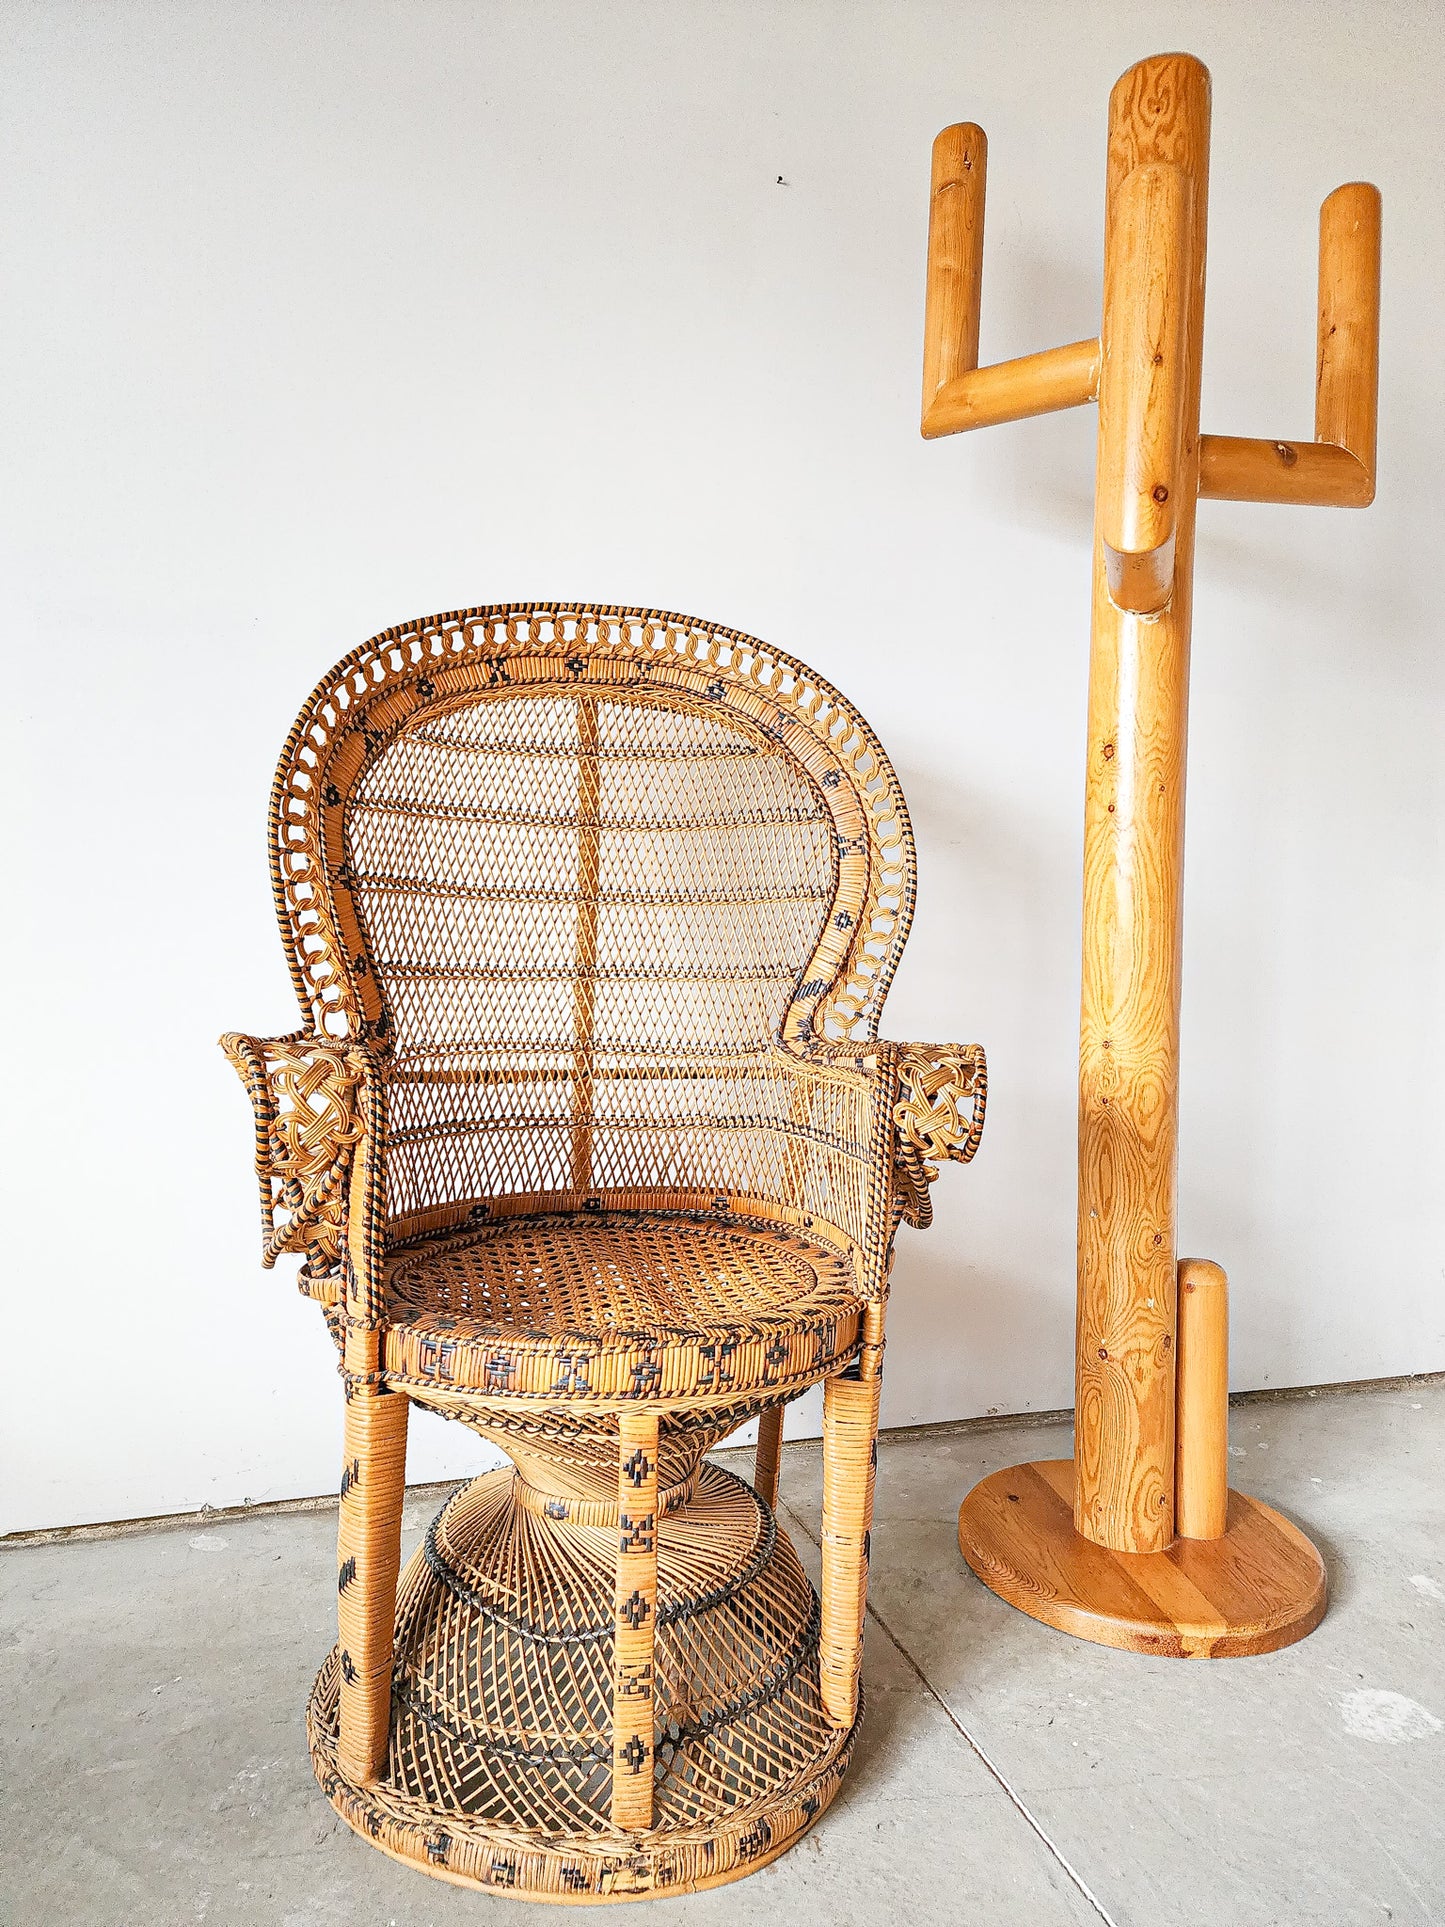 Vintage Adult Size Peacock Chair - Reclaimed Mt. Goods